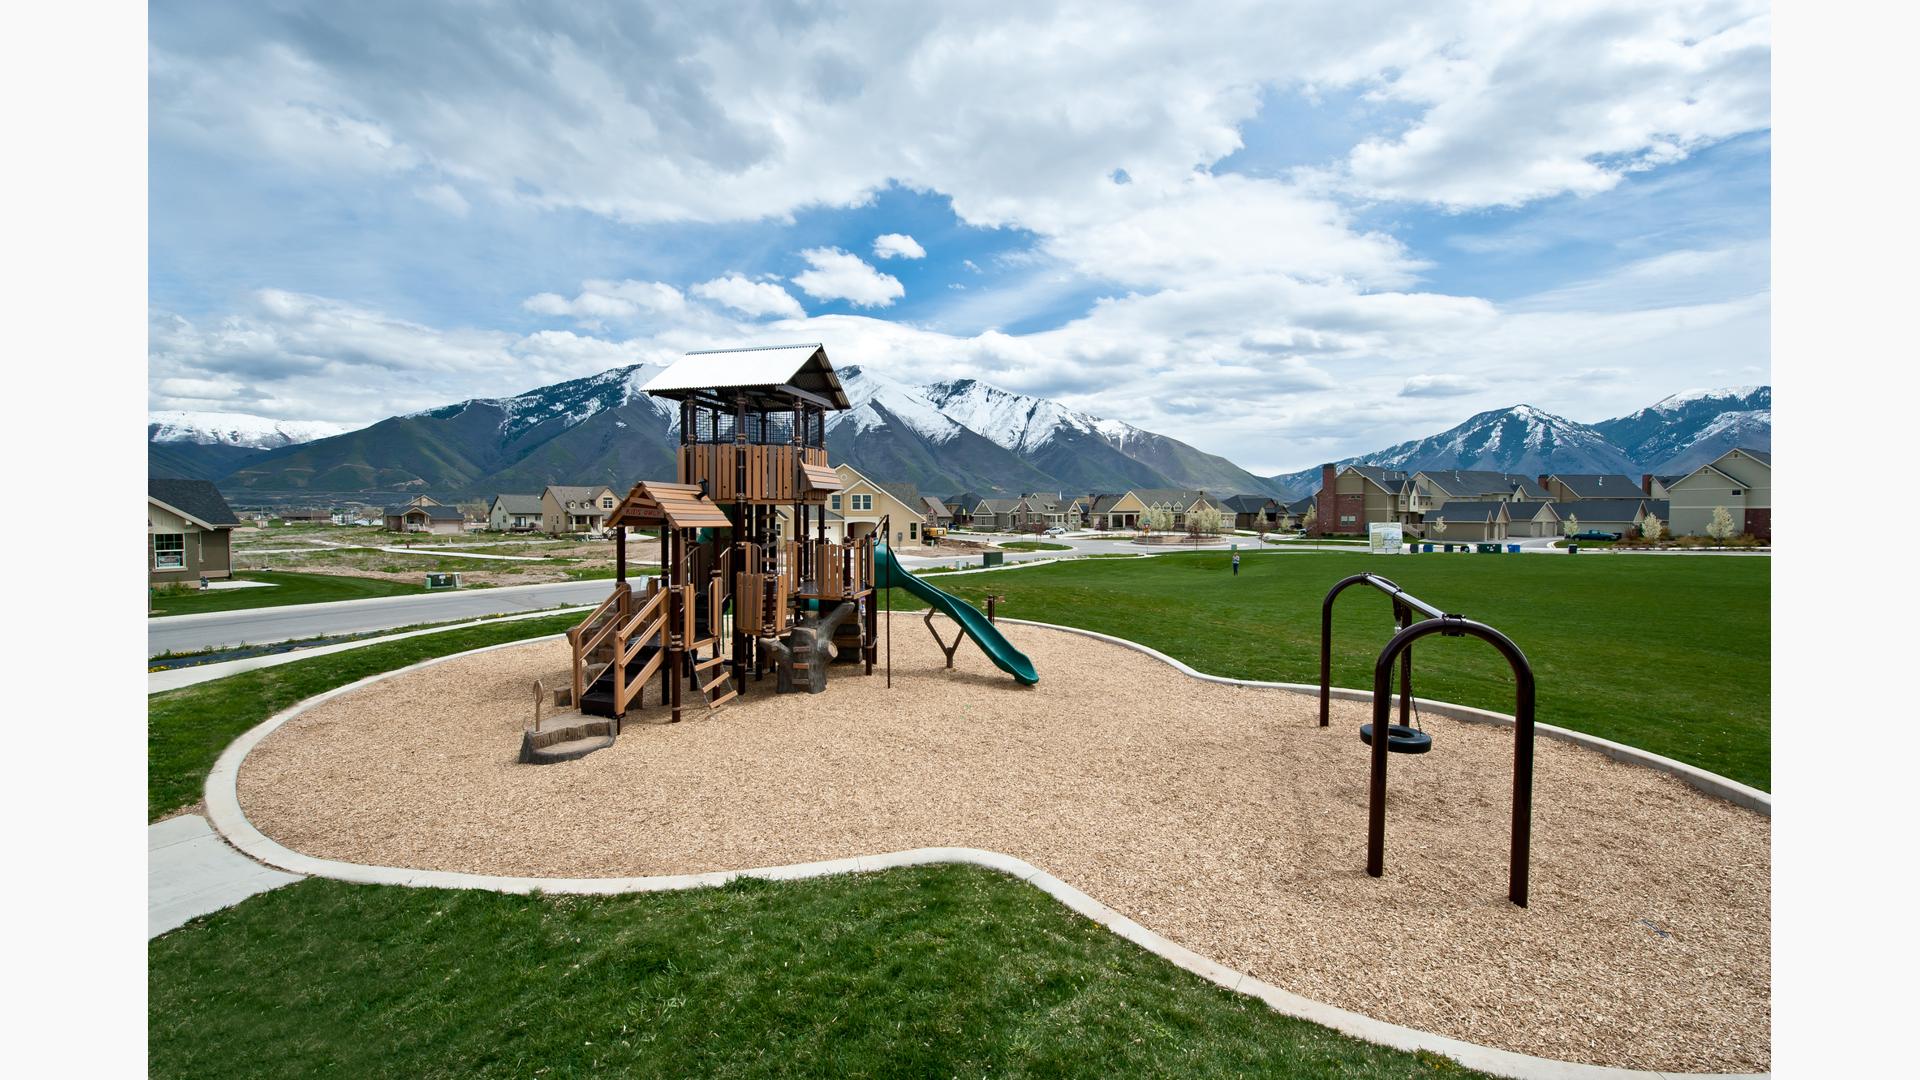 Nature-inspired playground tower with snow-capped mountains in the background.